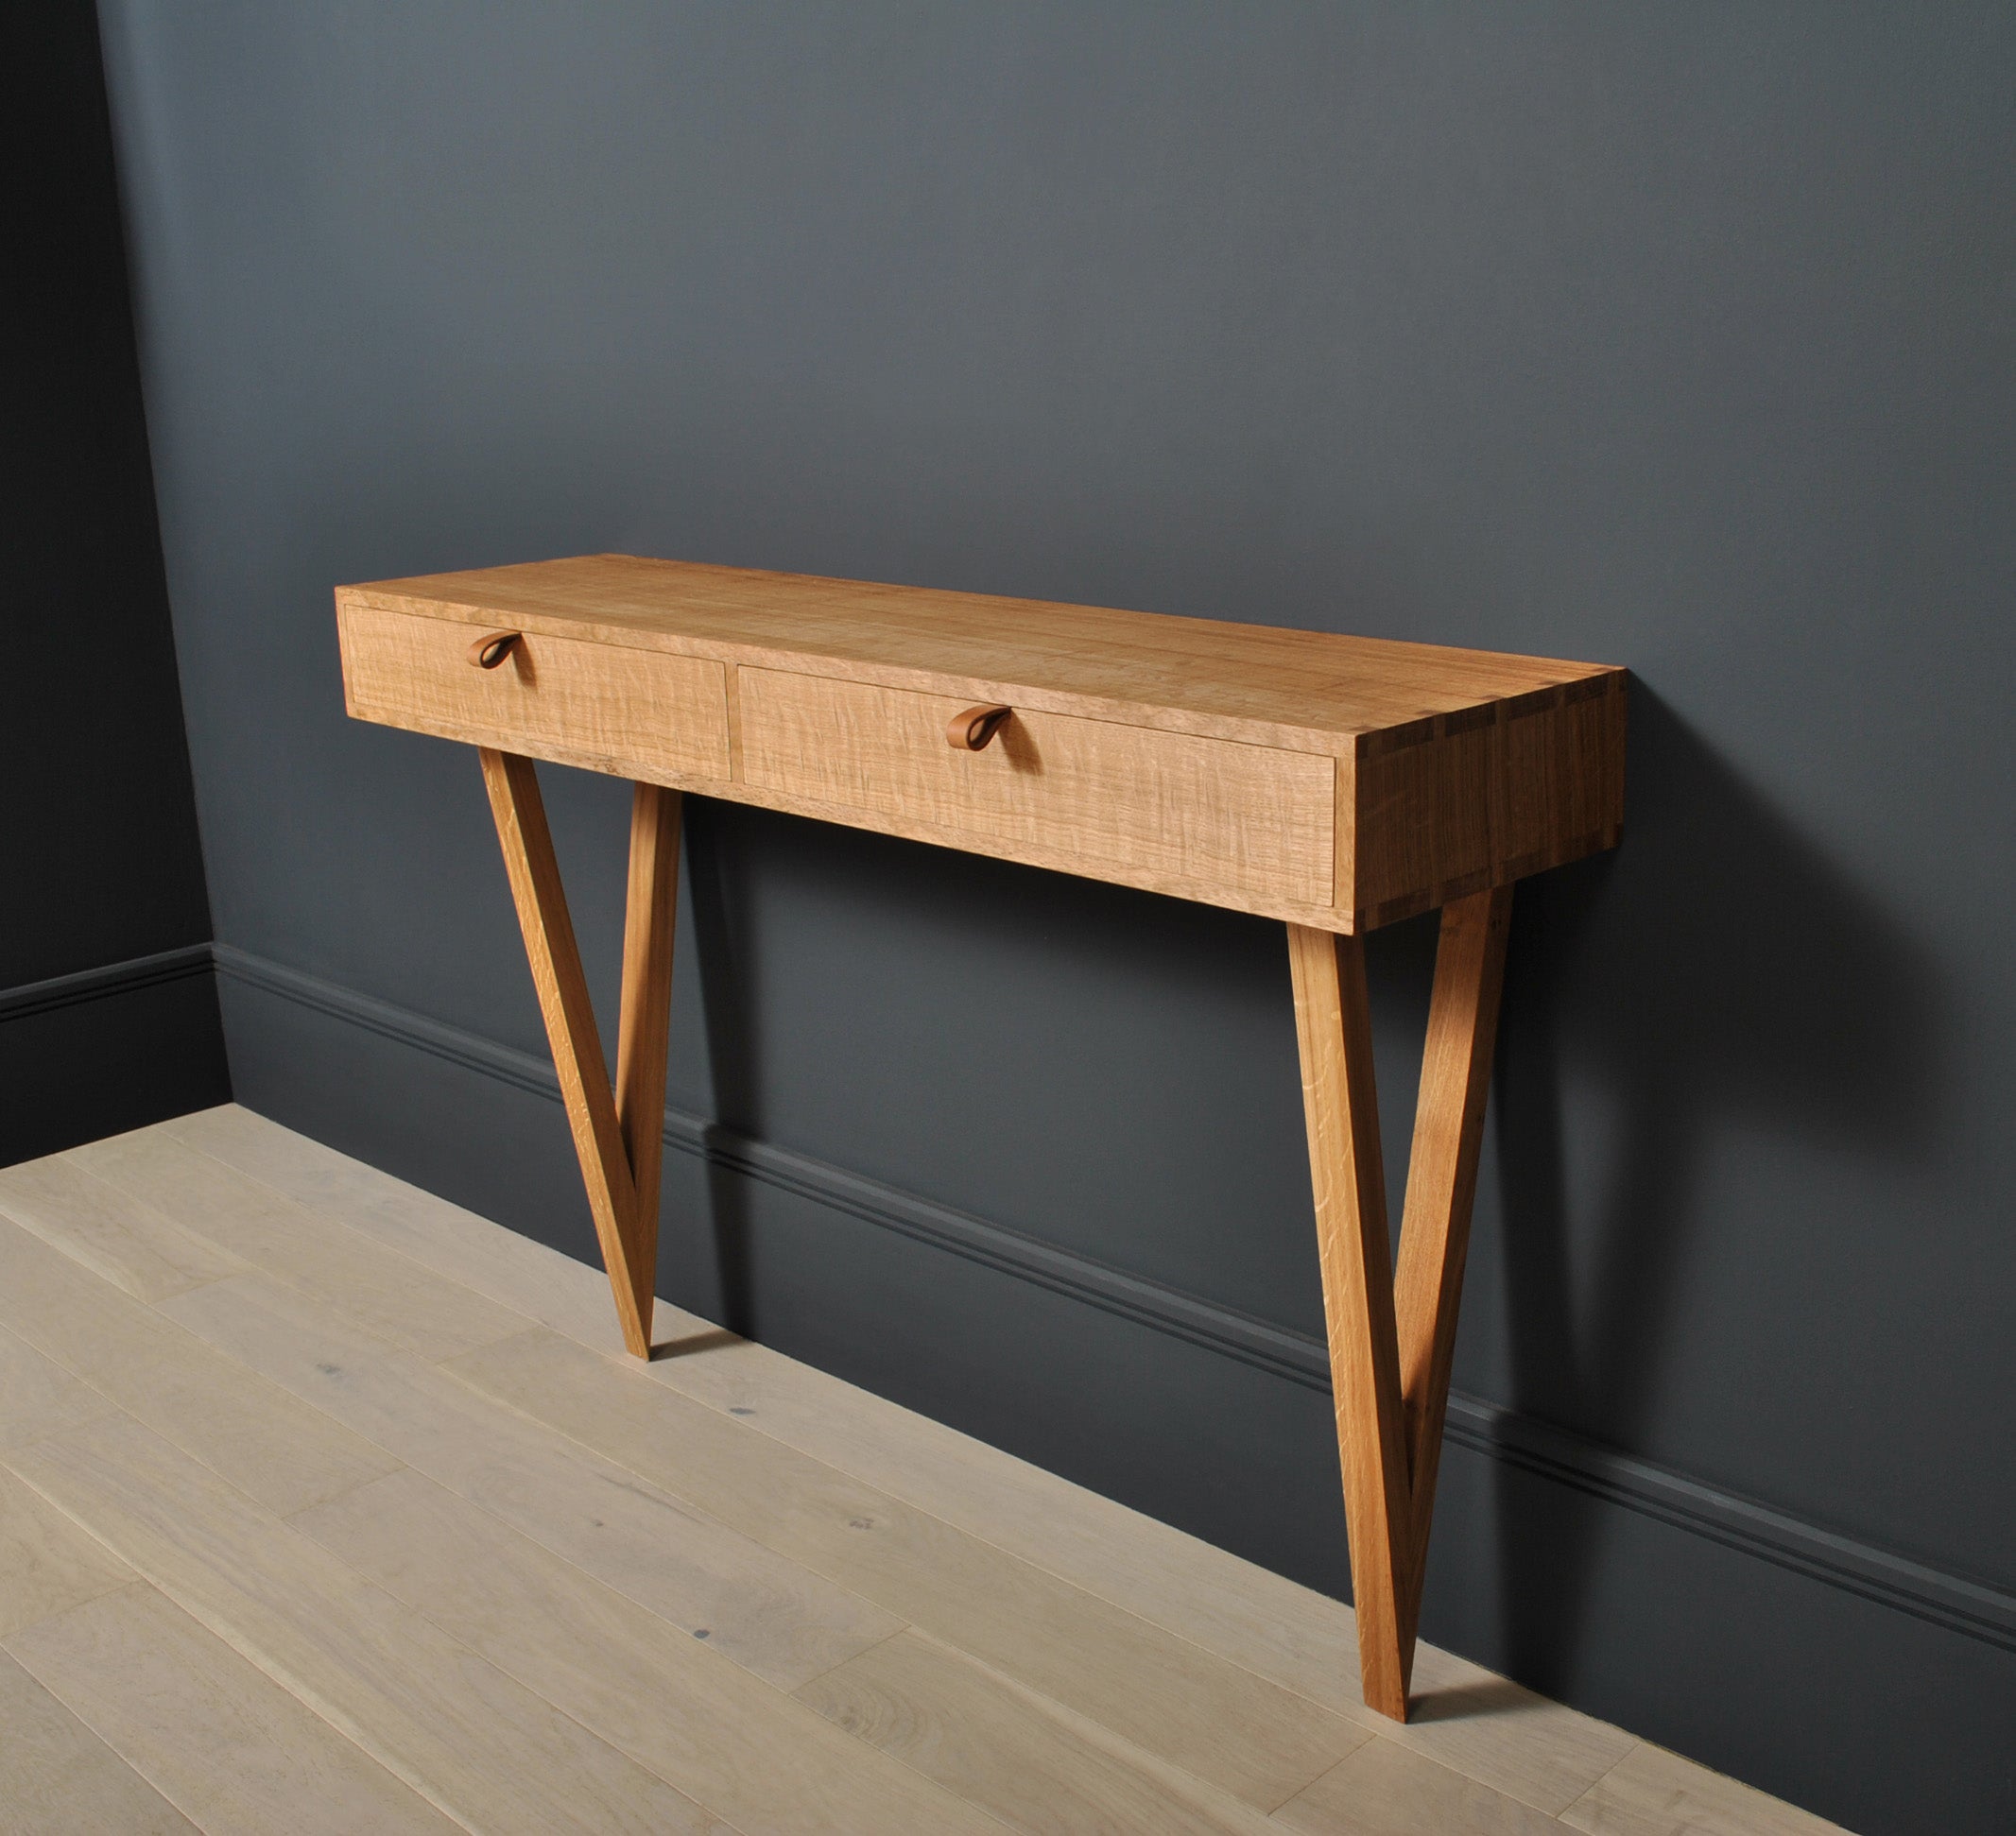 Modernist oak vanity table with two drawers - designed and completely handmade in England using traditional furniture making techniques. Skilfully handcrafted from the finest fully quarter-sawn English oak. Hand dovetailed joints to the main oak box